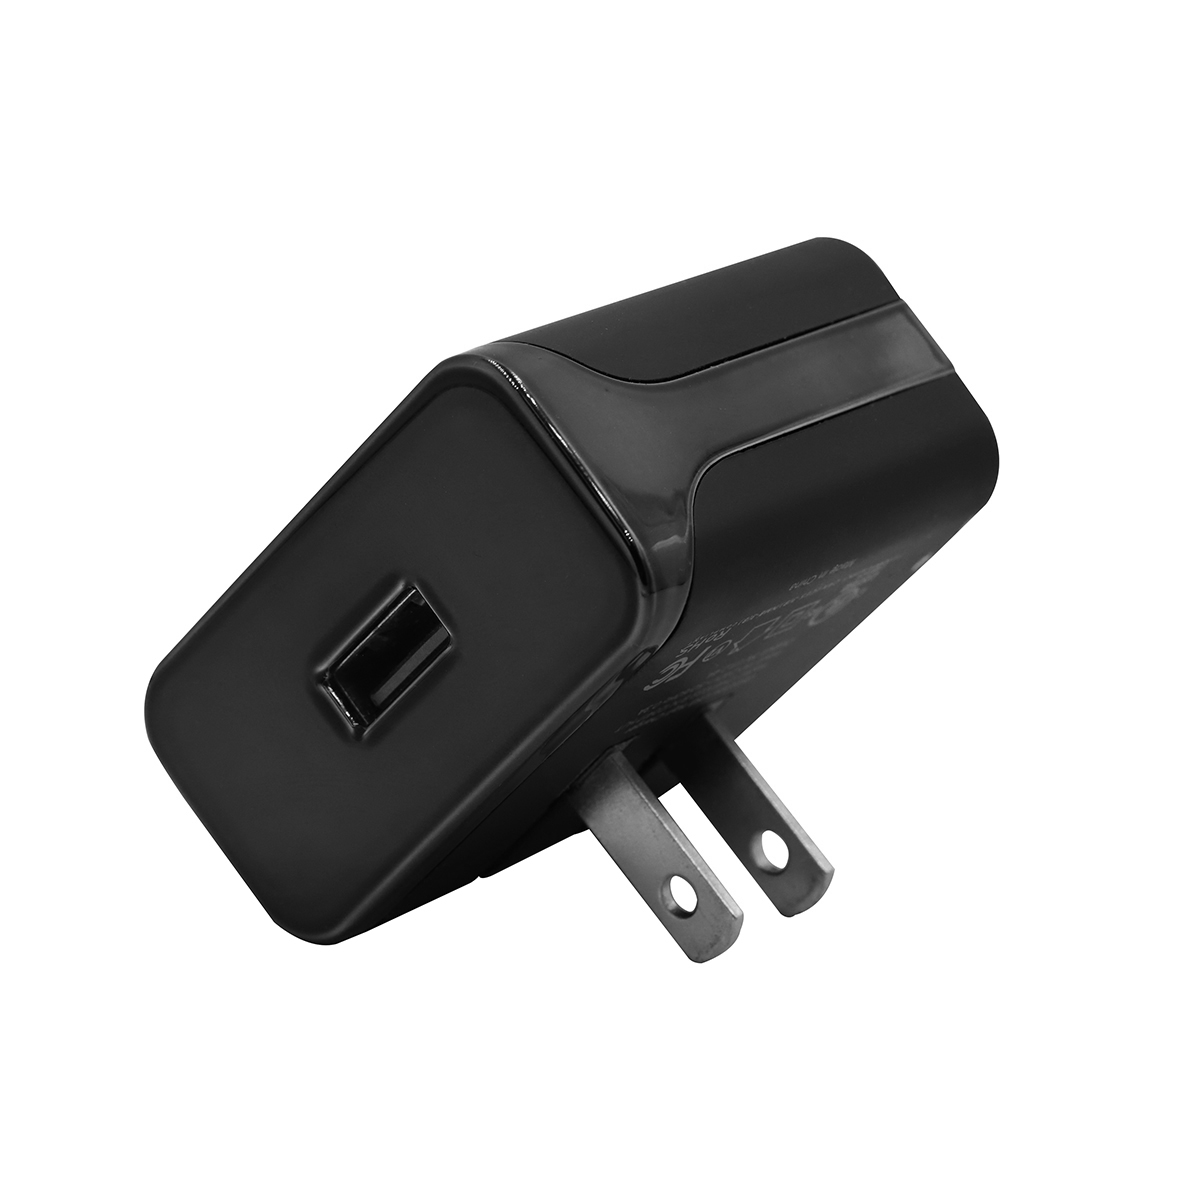 1. LM-CHG1033 USB Wall Charger Corporate Purchase and bulk purchase from China Union Power -Description-